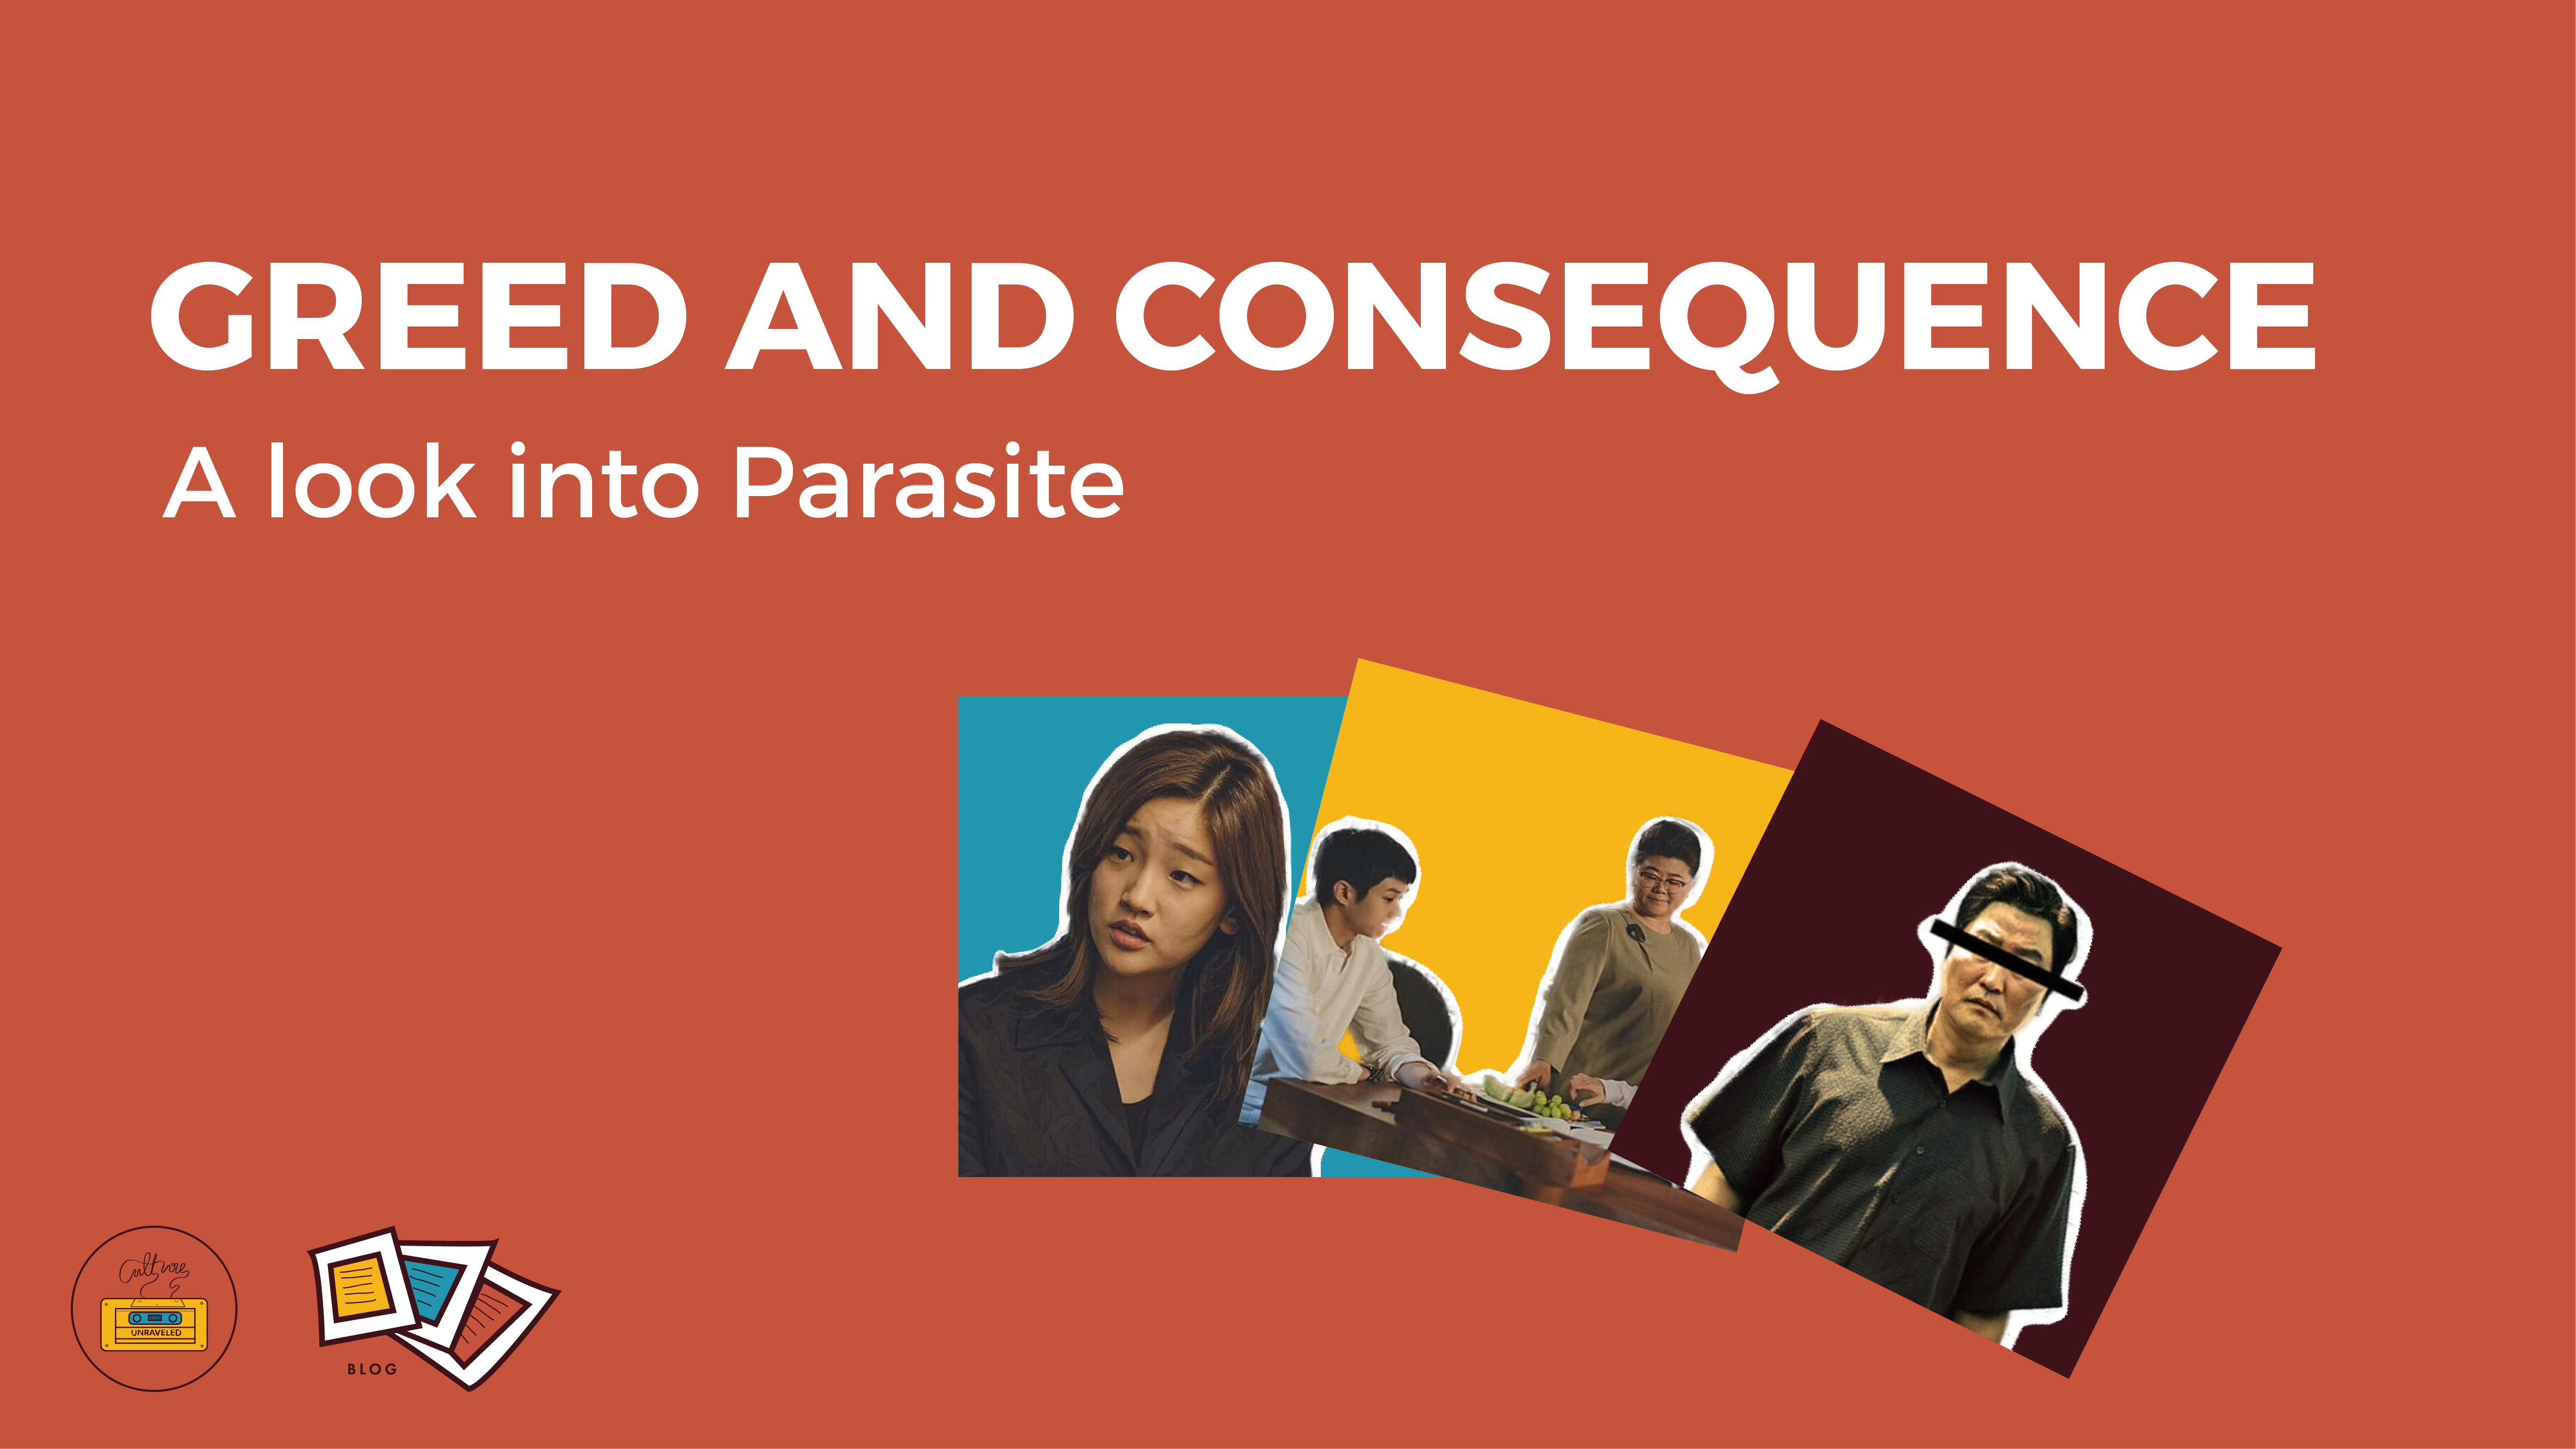 Greed and Consequence. A look into Parasite